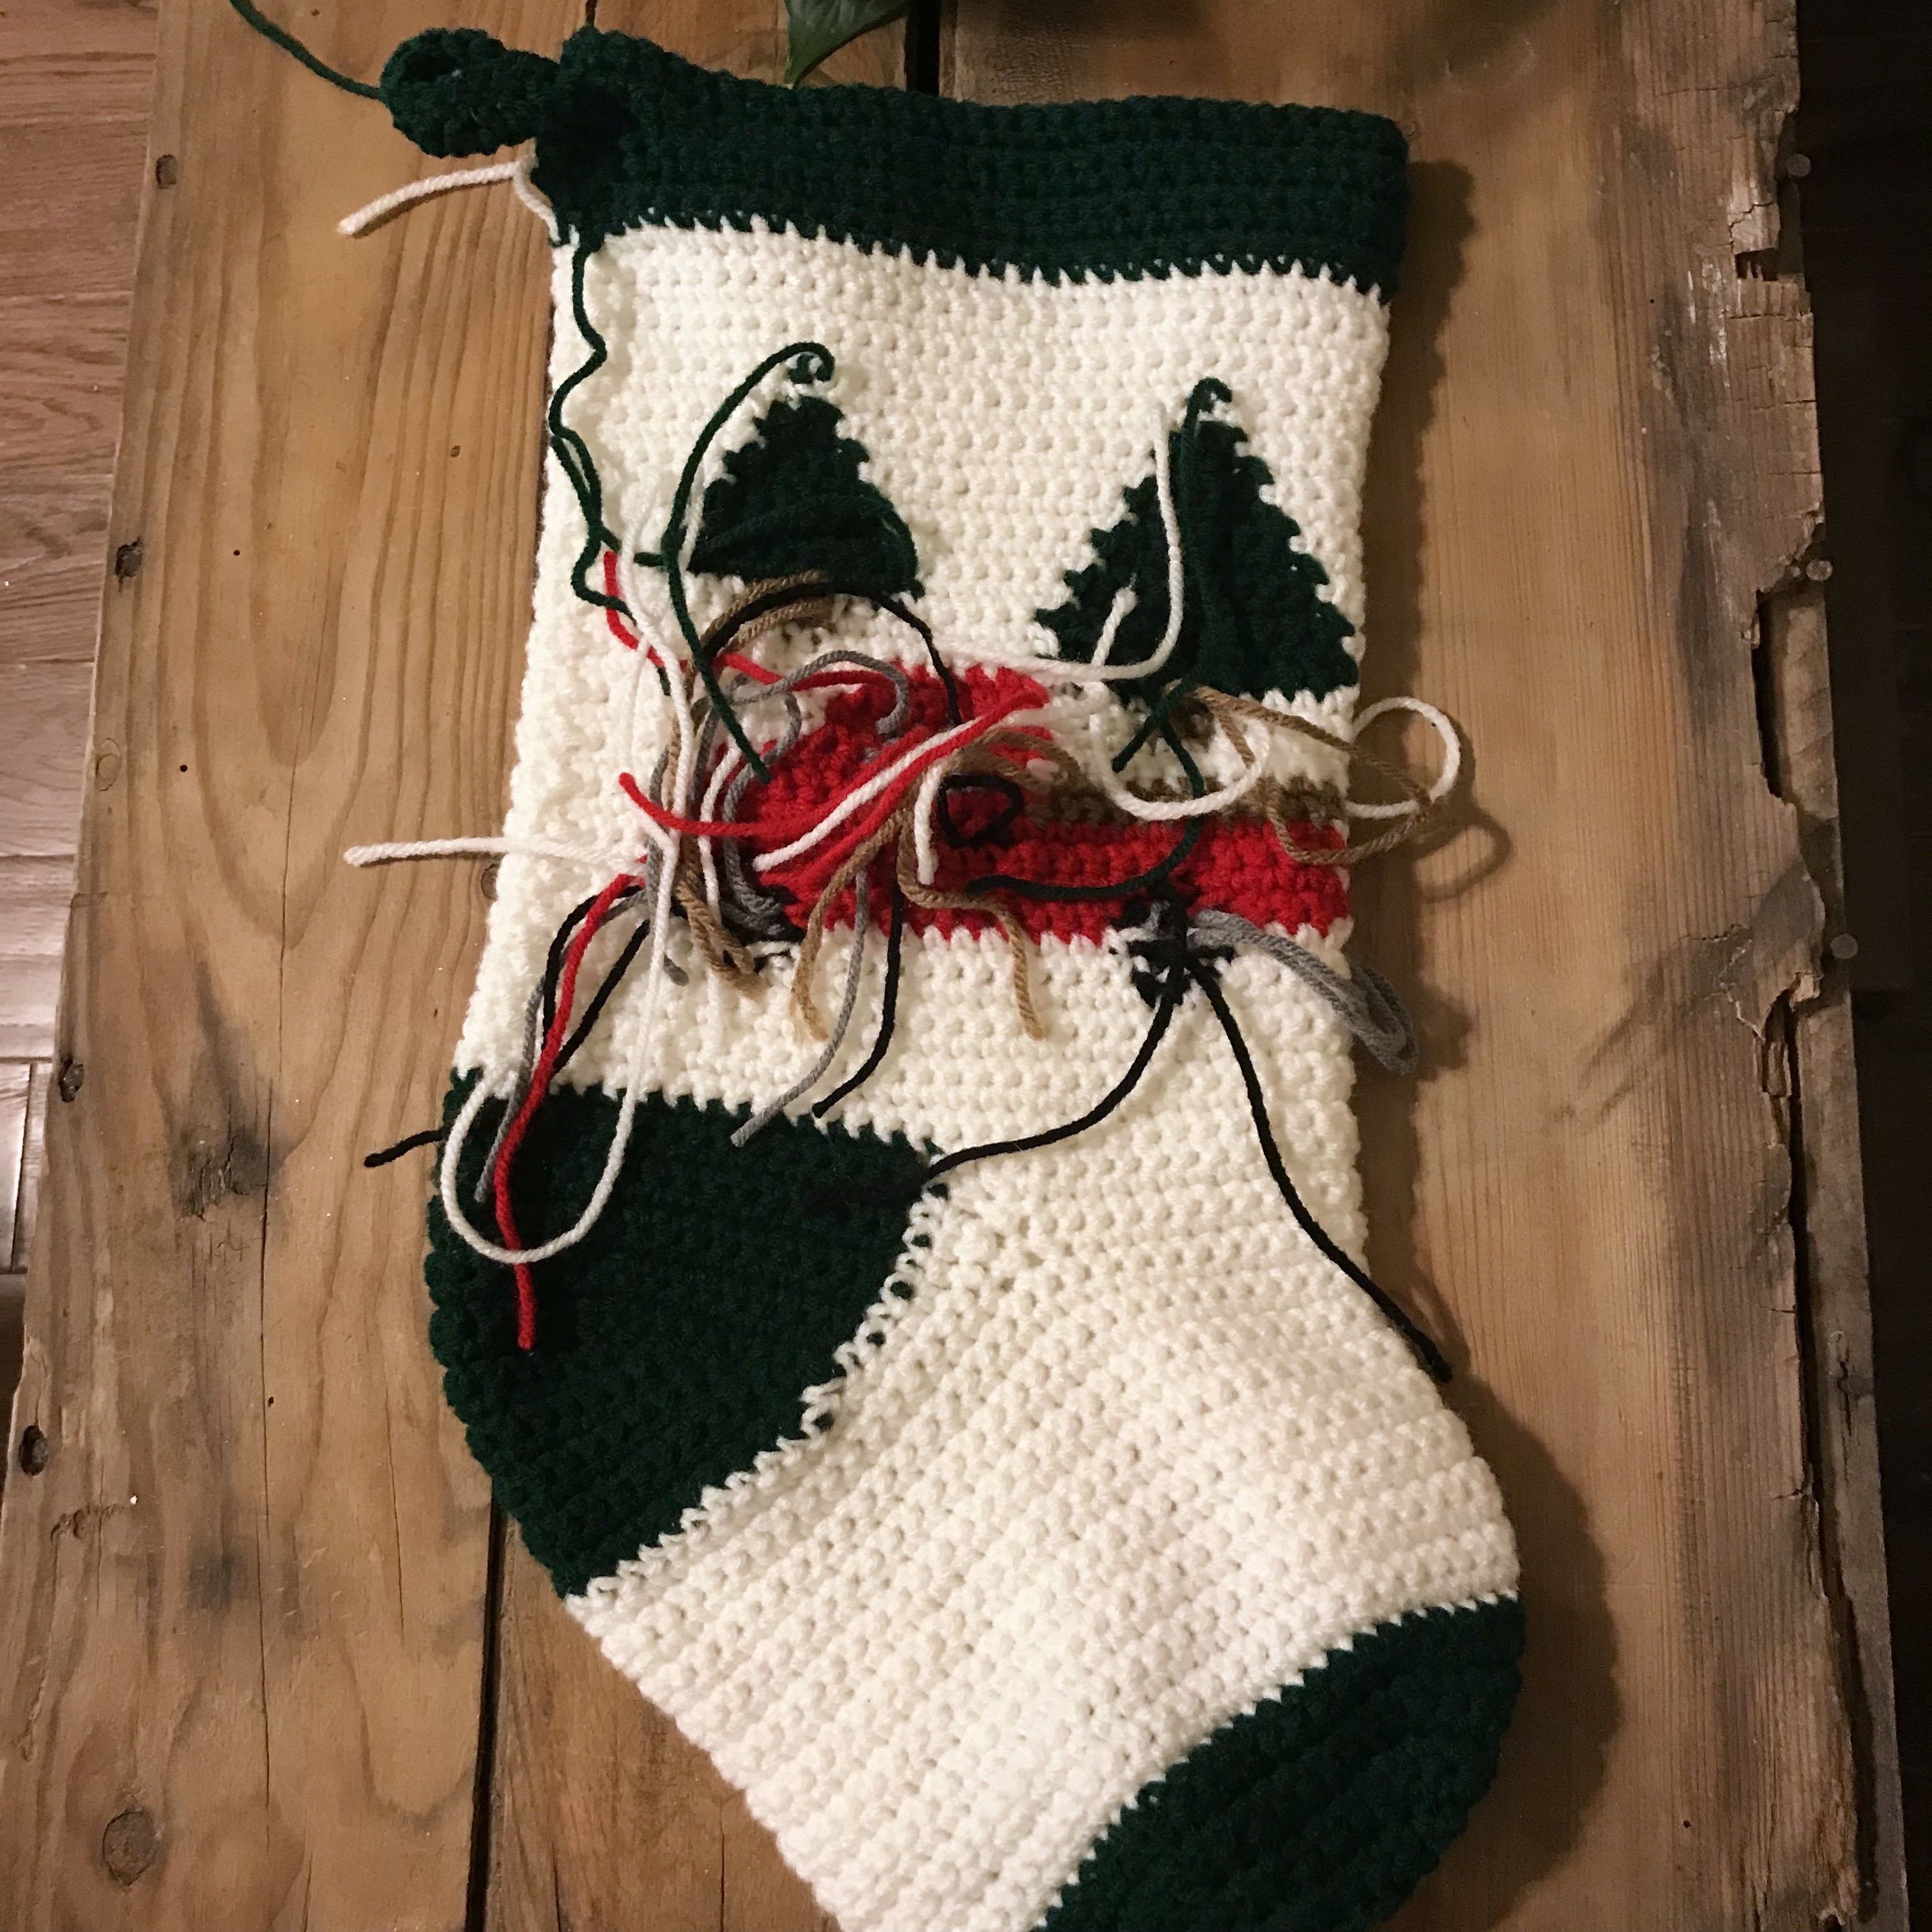 The inside of a Christmas stocking before the ends are woven in